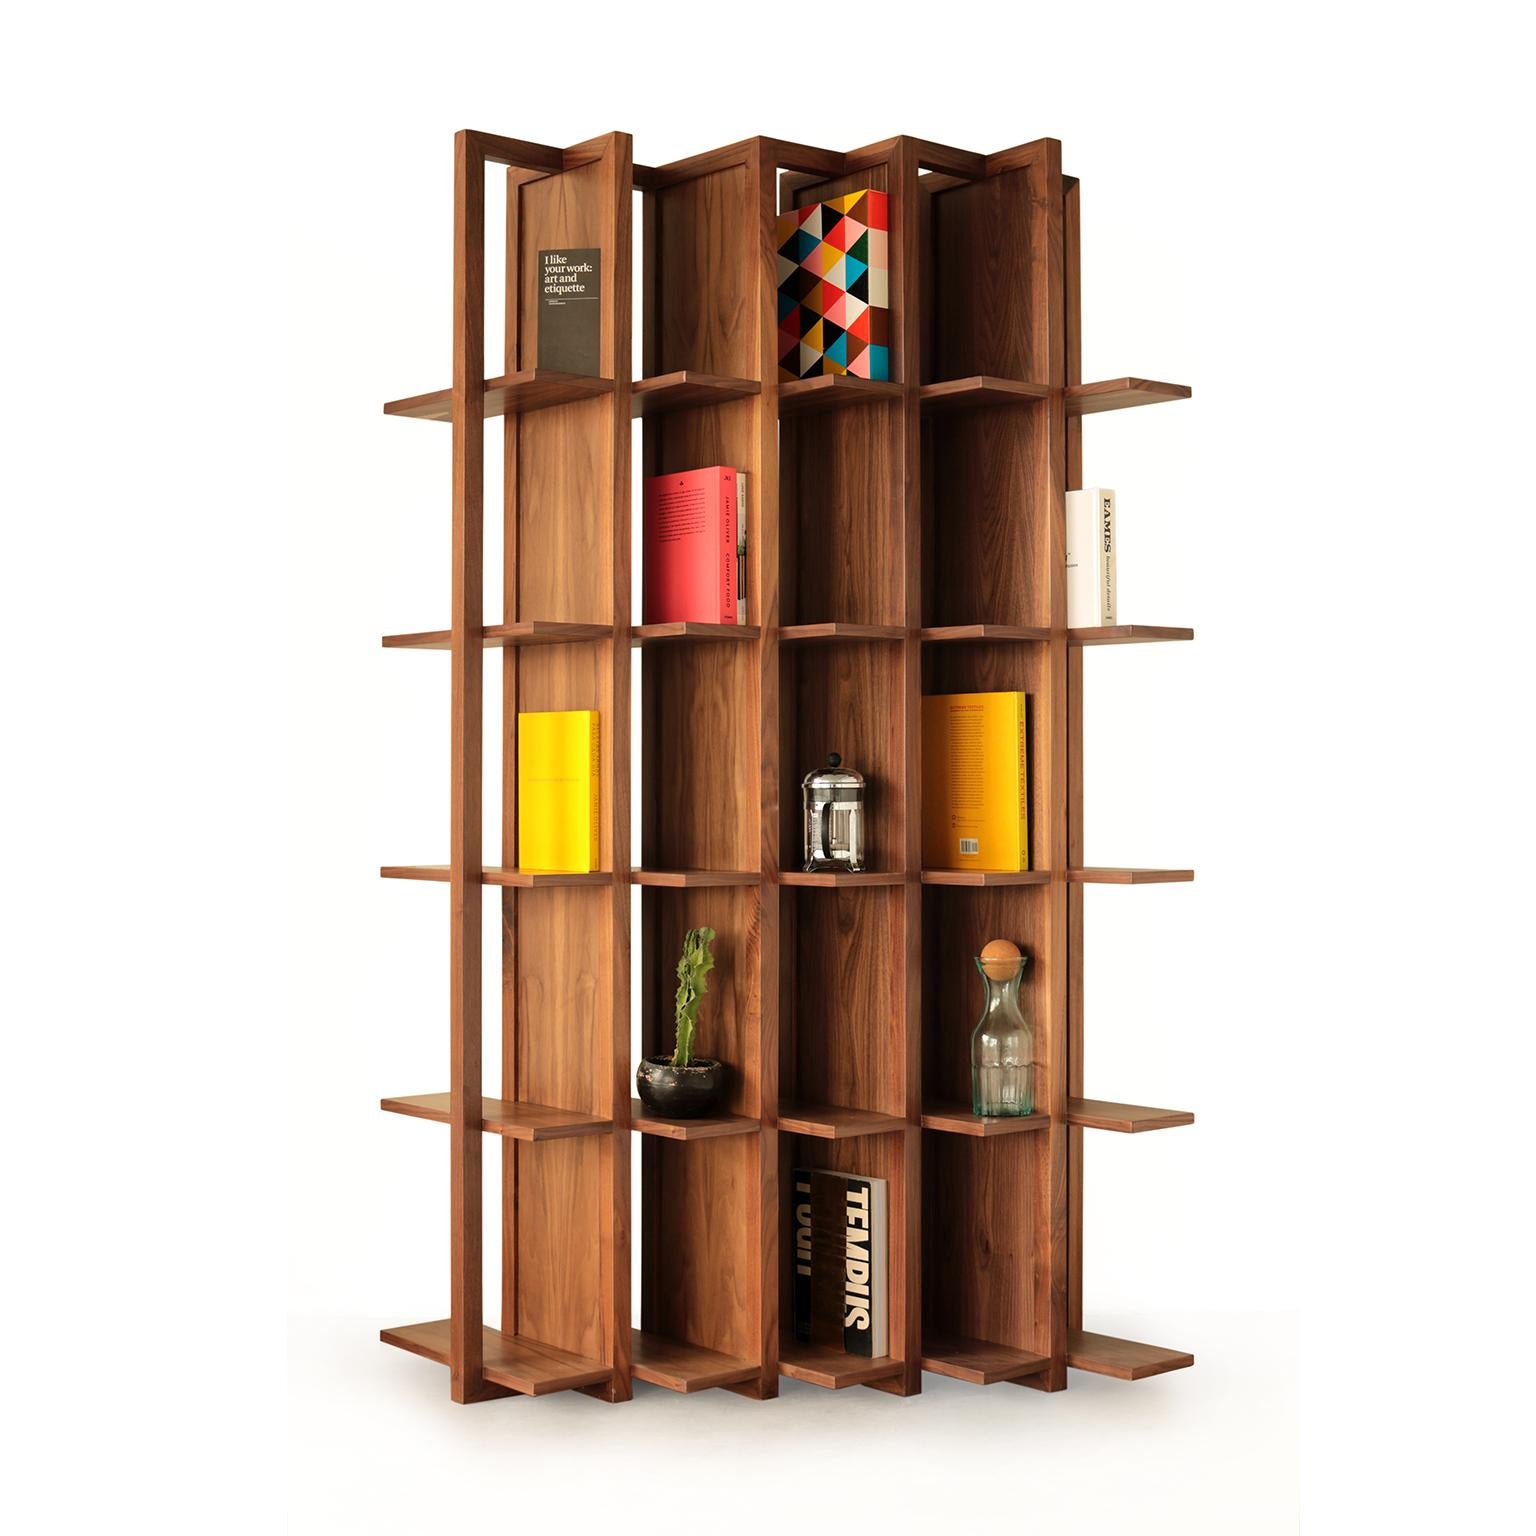 Transversal is a bookcase and space divider, created in solid wood and natural veneer boards. It is the result of the collaboration between FOAM design studio and Breuer carpenters, a Mexican company with years of experience in the manufacture of